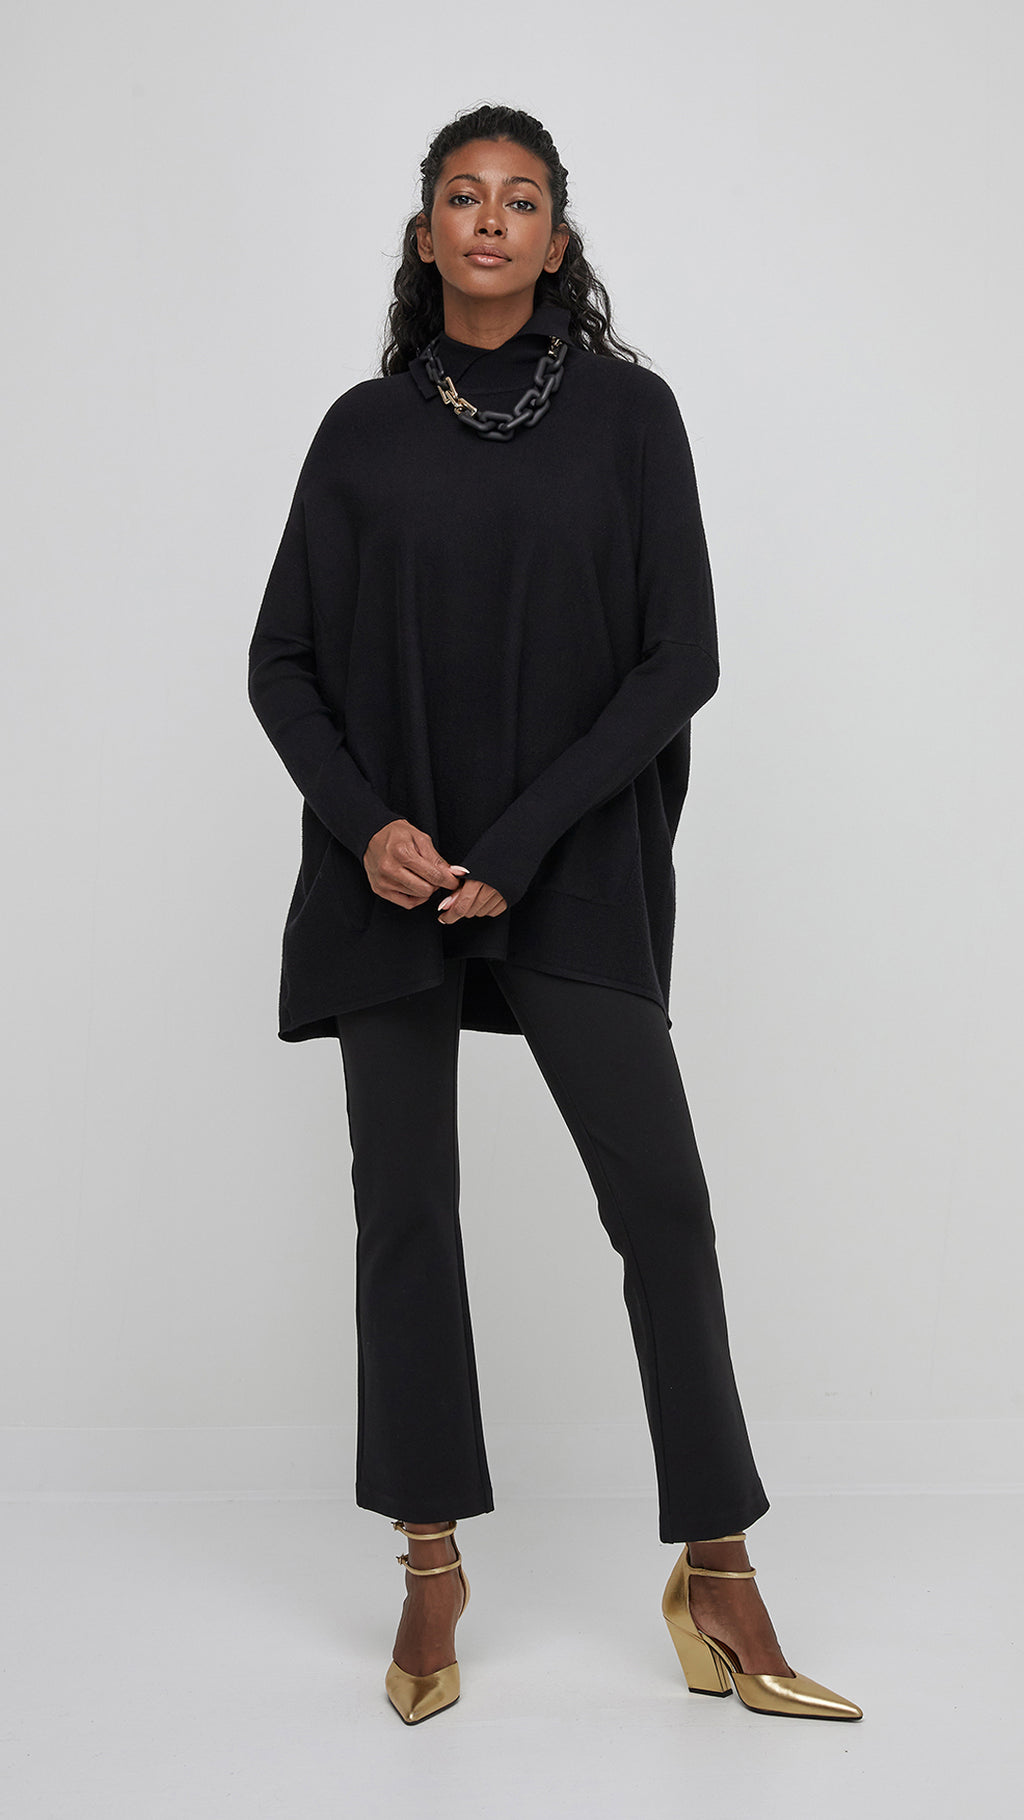 The oversized silhouette of this jumper not only adds a contemporary flair but also ensures a comfortable and flattering fit for all body types. Its versatile black color makes it easy to pair with various bottoms, from jeans to skirts, allowing for endless styling possibilities.